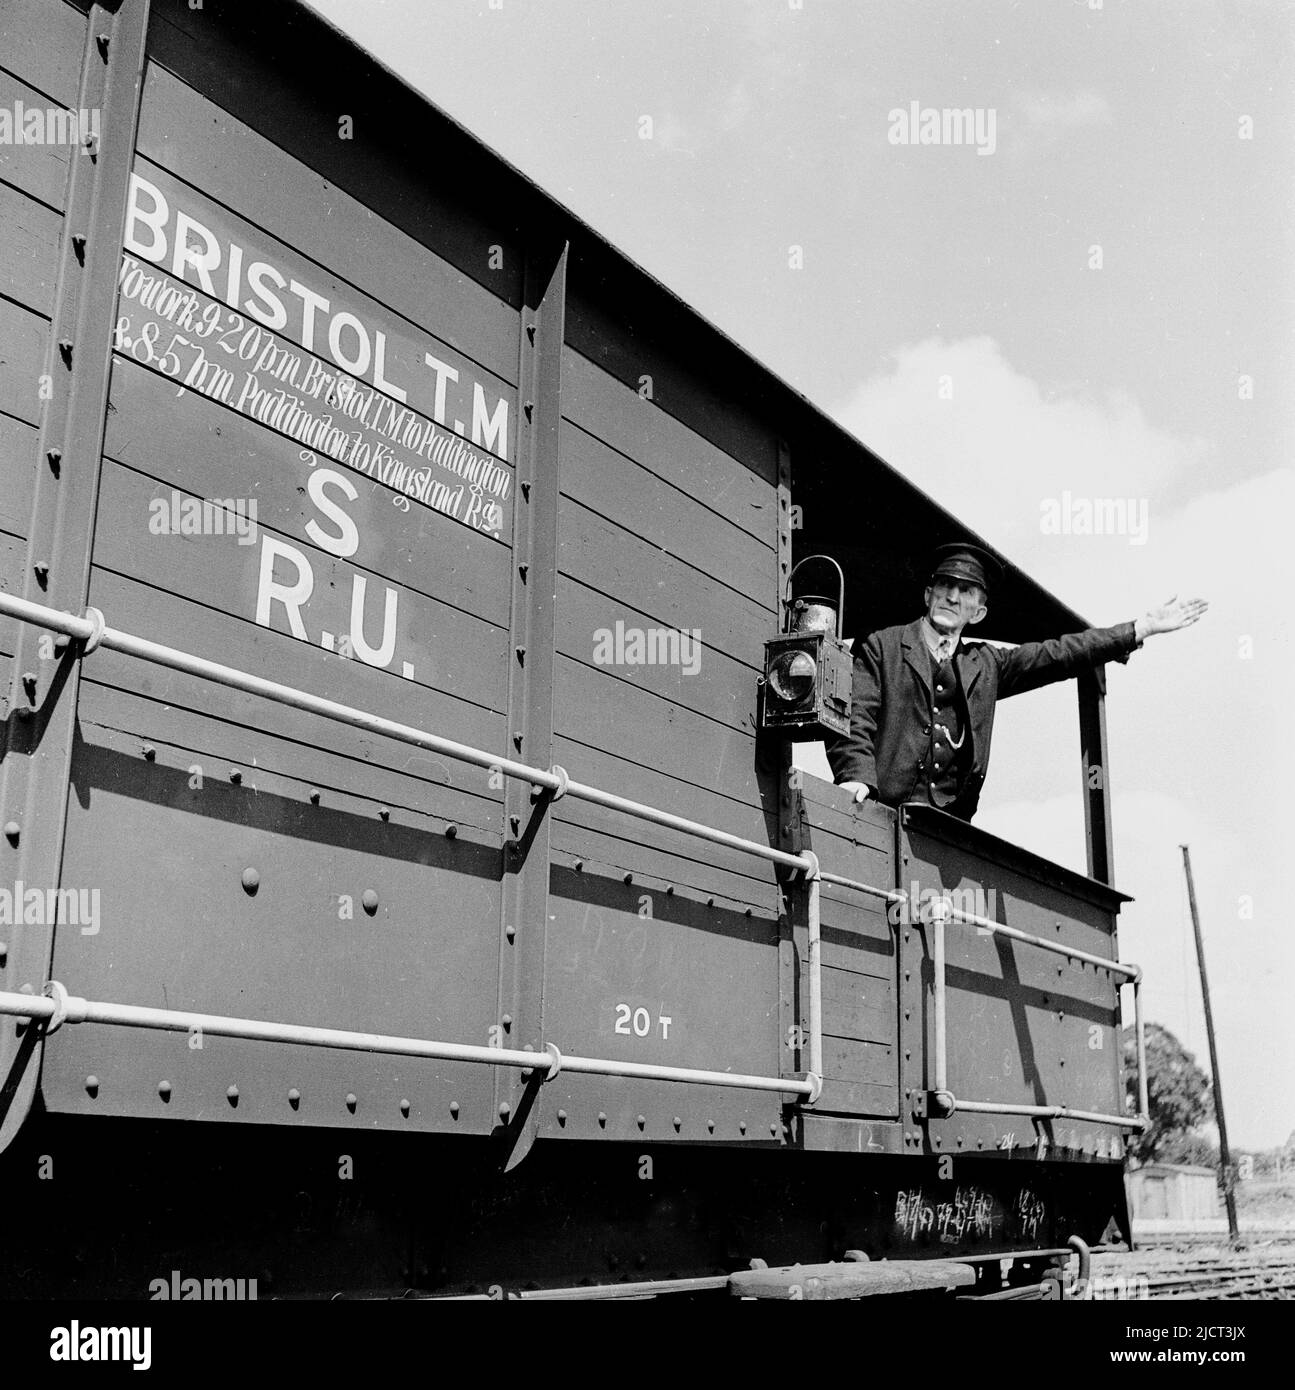 1950s, historical, a uniformed train guard in the open rear of a freight wagon, standing with his arm out, signalling, London docks, England UK. Writing on the side of the freight carriage, Bristol T. M, (Temple Mead) -Paddington. A railway warning lantern is hanging on the side of the wooden carriage. Stock Photo